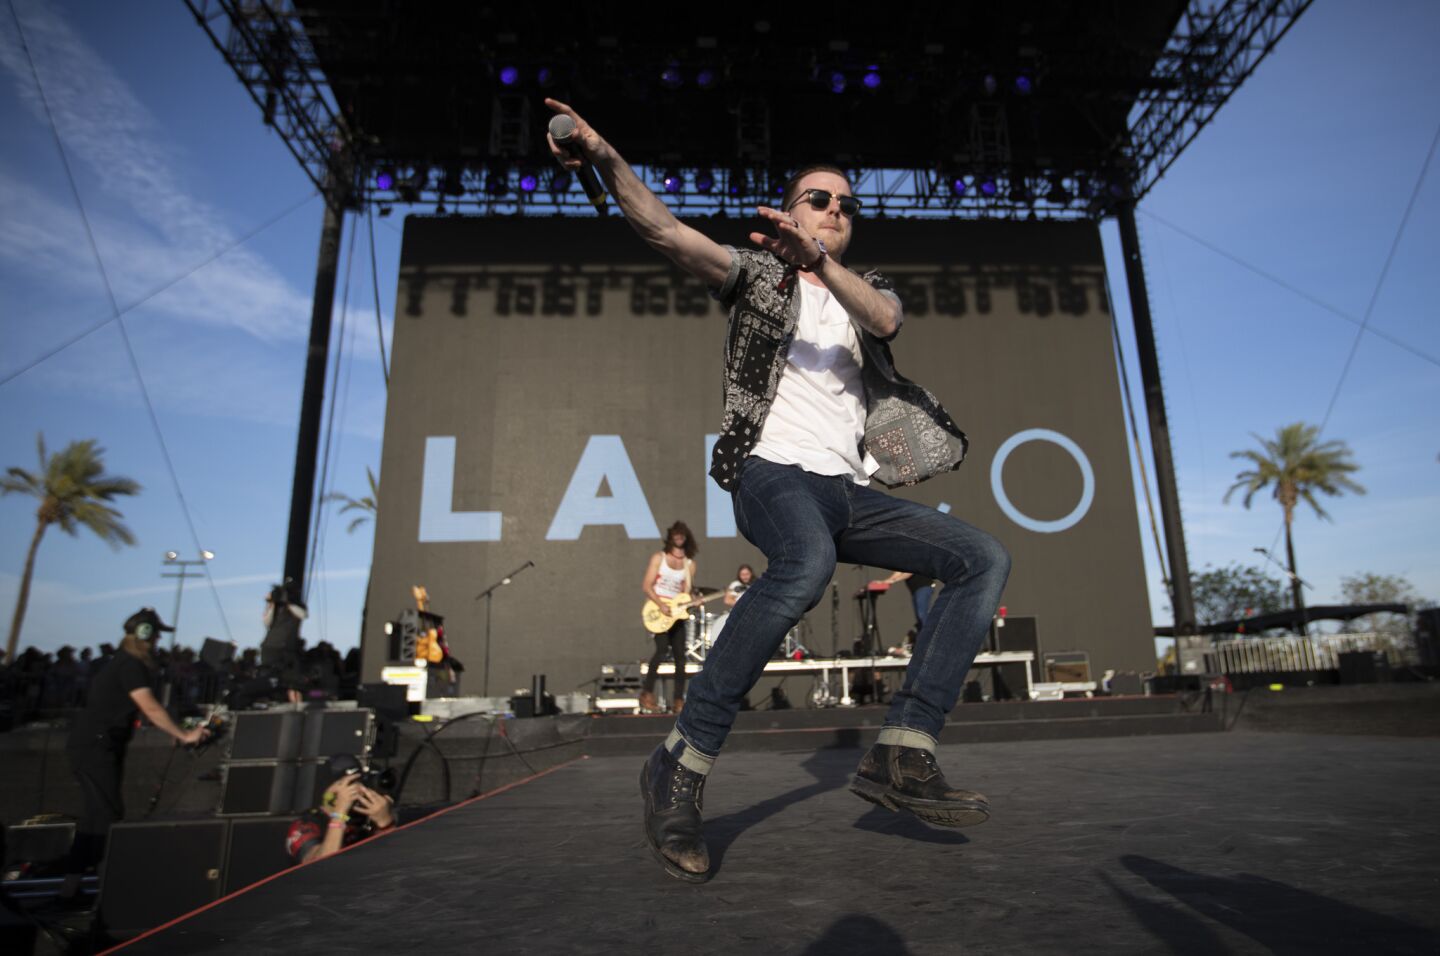 Brandon Lancaster of LANCO performs on the Mane Stage on the second of the three-day 2019 Stagecoach Country Music Festival.